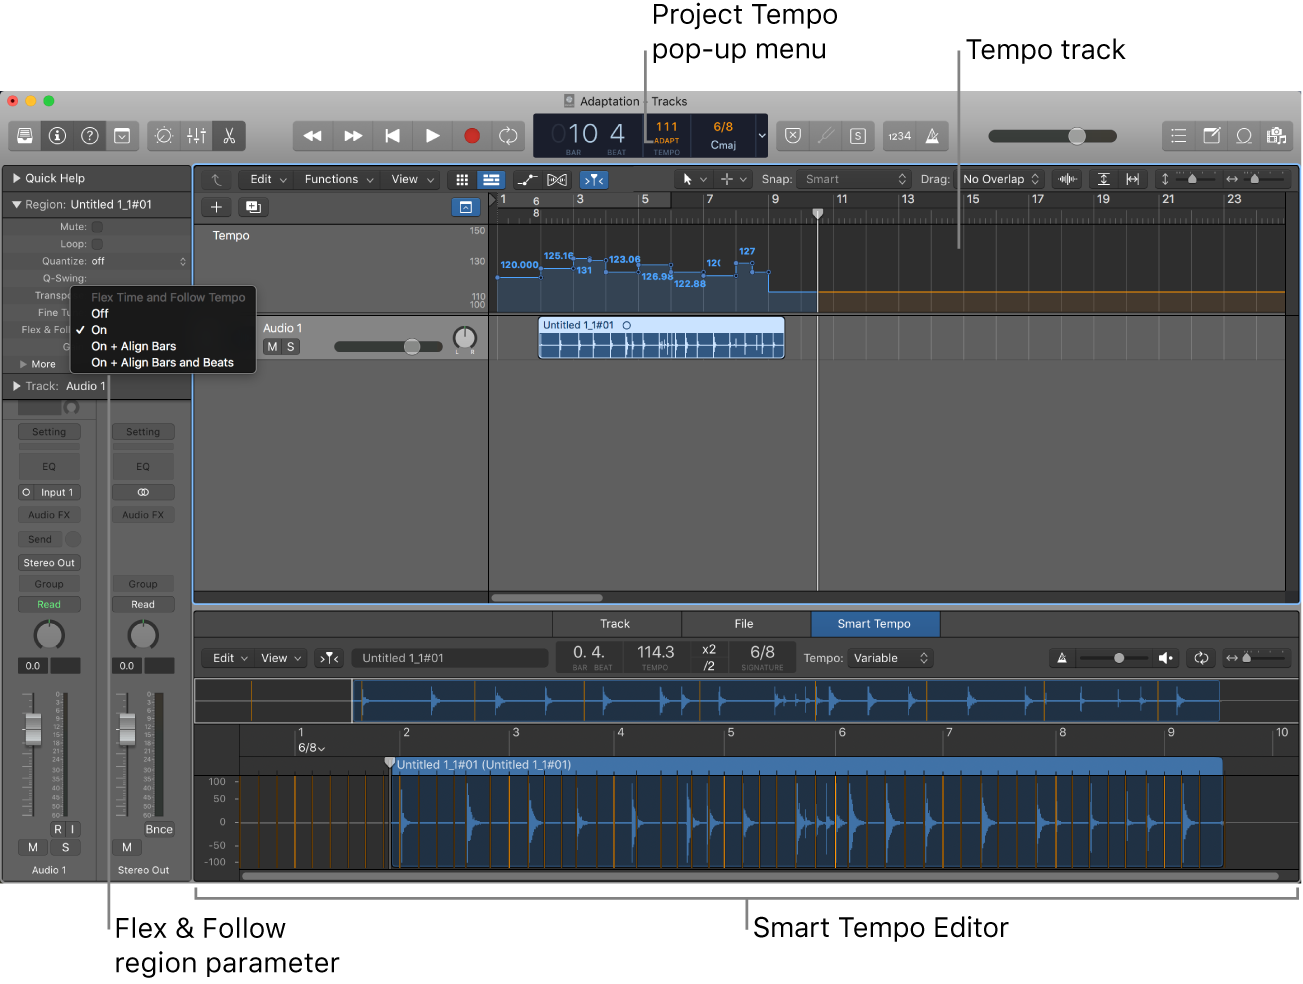 Figure. Project showing recording, Adapt mode chosen, tempo changes in the Tempo track, and the Smart Tempo Editor open.